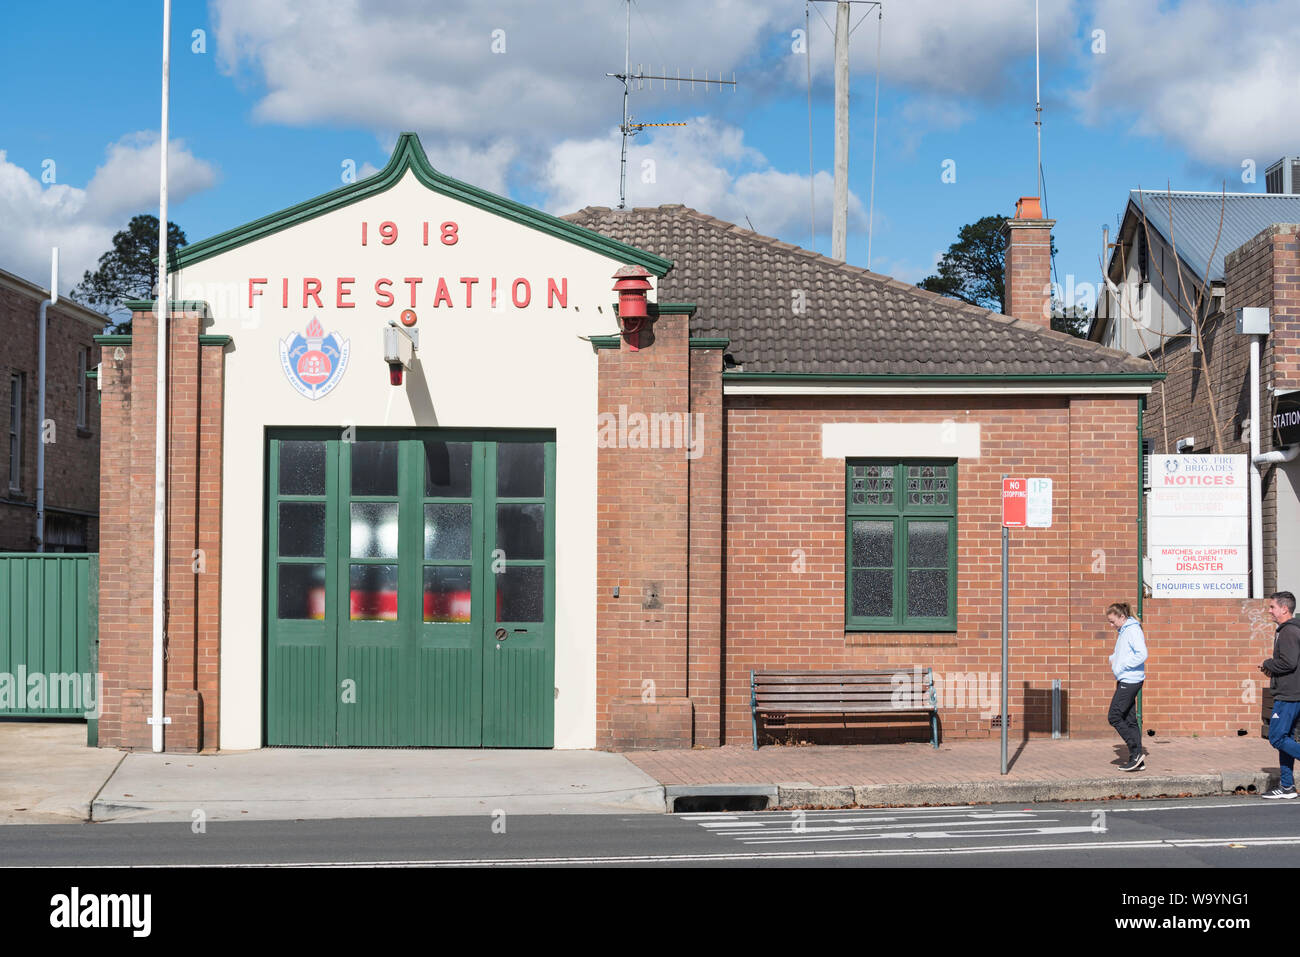 Die 1918 Mittagong Fire Station Nr. 10 Straße Mittagong Bowral, New South Wales, Australien Stockfoto